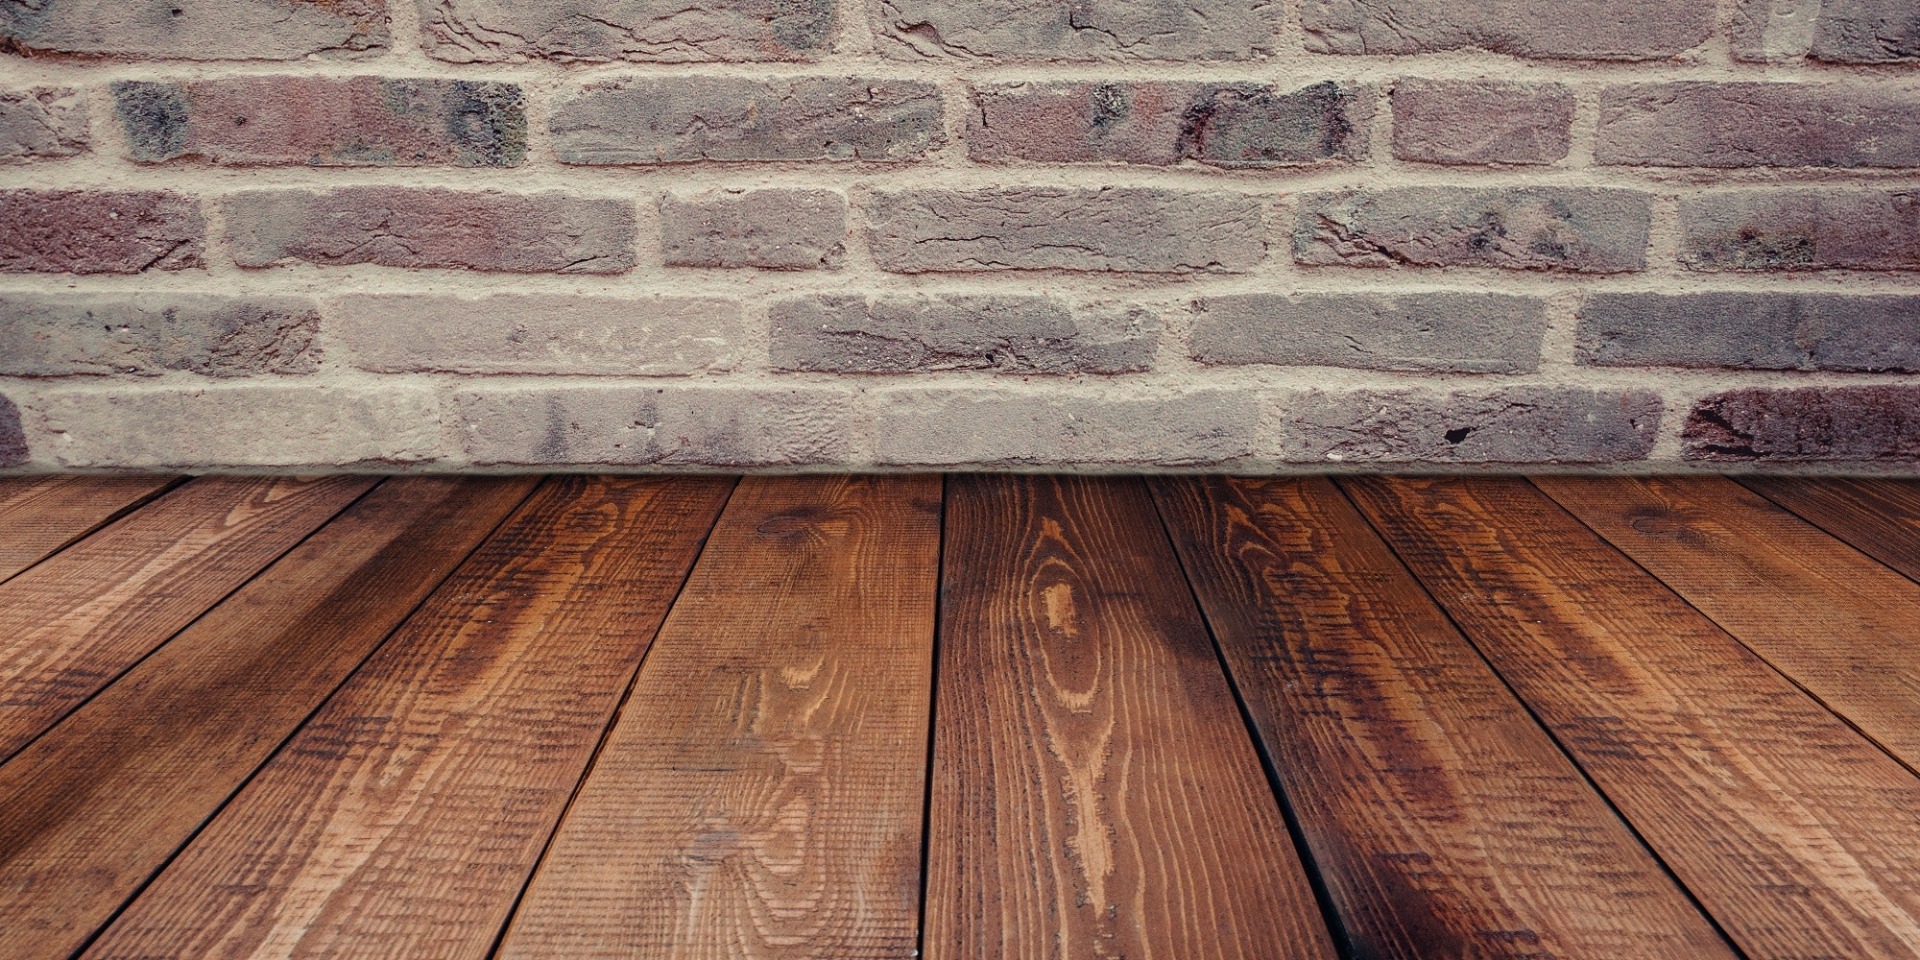 How to Stain a Wooden Floor